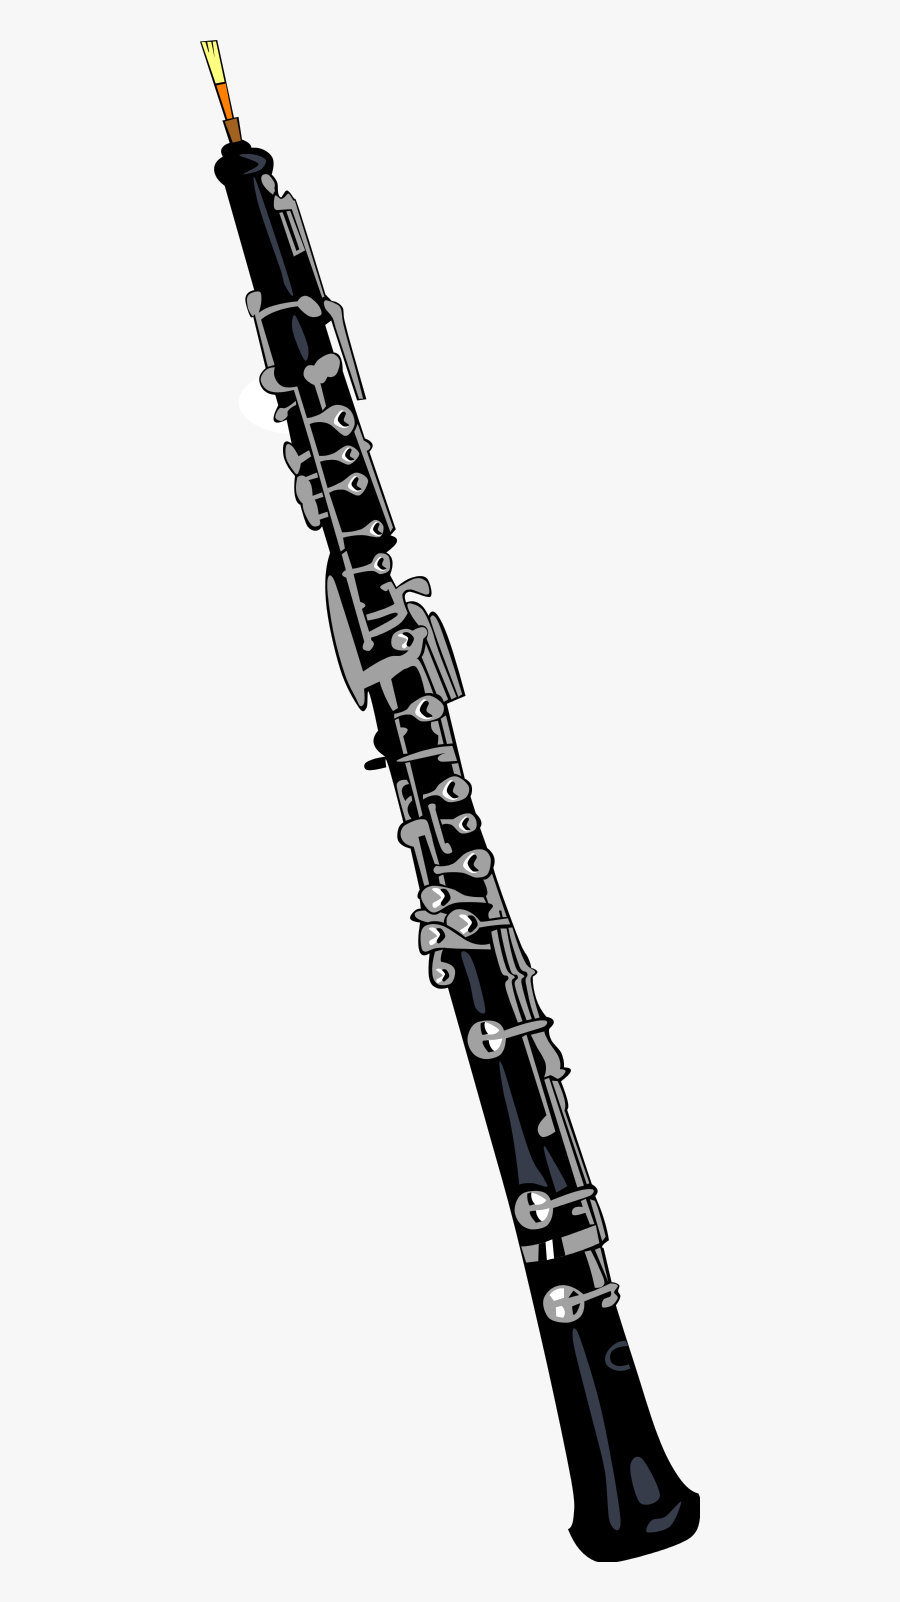 File - Oboe 1 - Svg - Wikimedia Commons - Oboe Clipart, Transparent Clipart